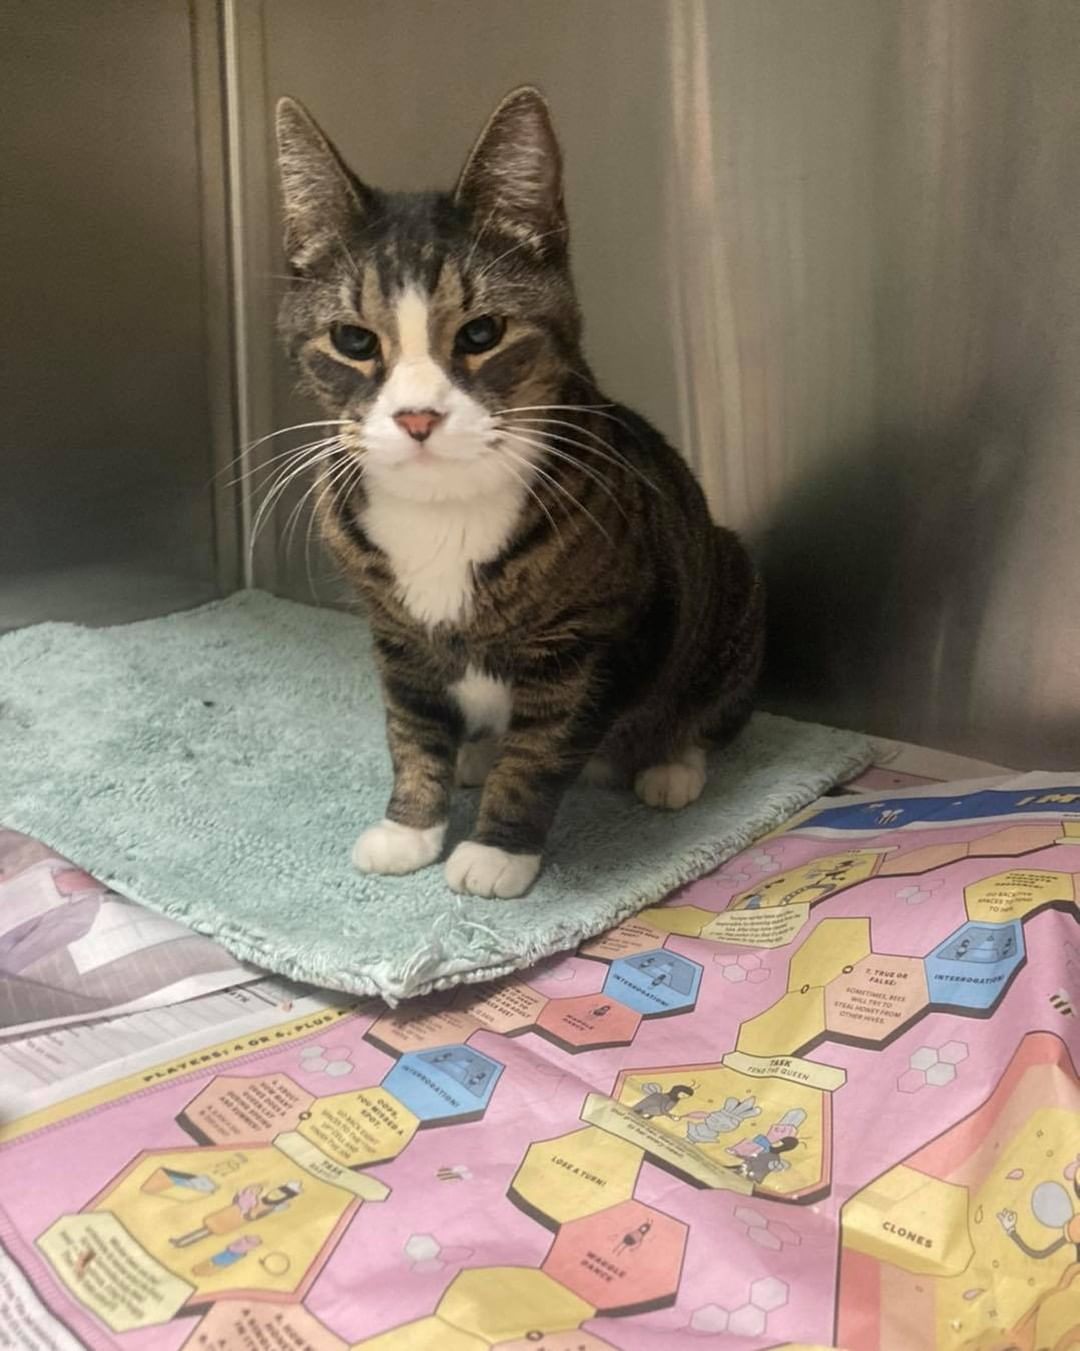 Found cats..
Orange cat found on Kelley St.
Female tabby cat found on Mary Ann Rd.
Female black and white cat found on Wilson St.
If you know where we belong, please call the shelter at 603-628-3544.